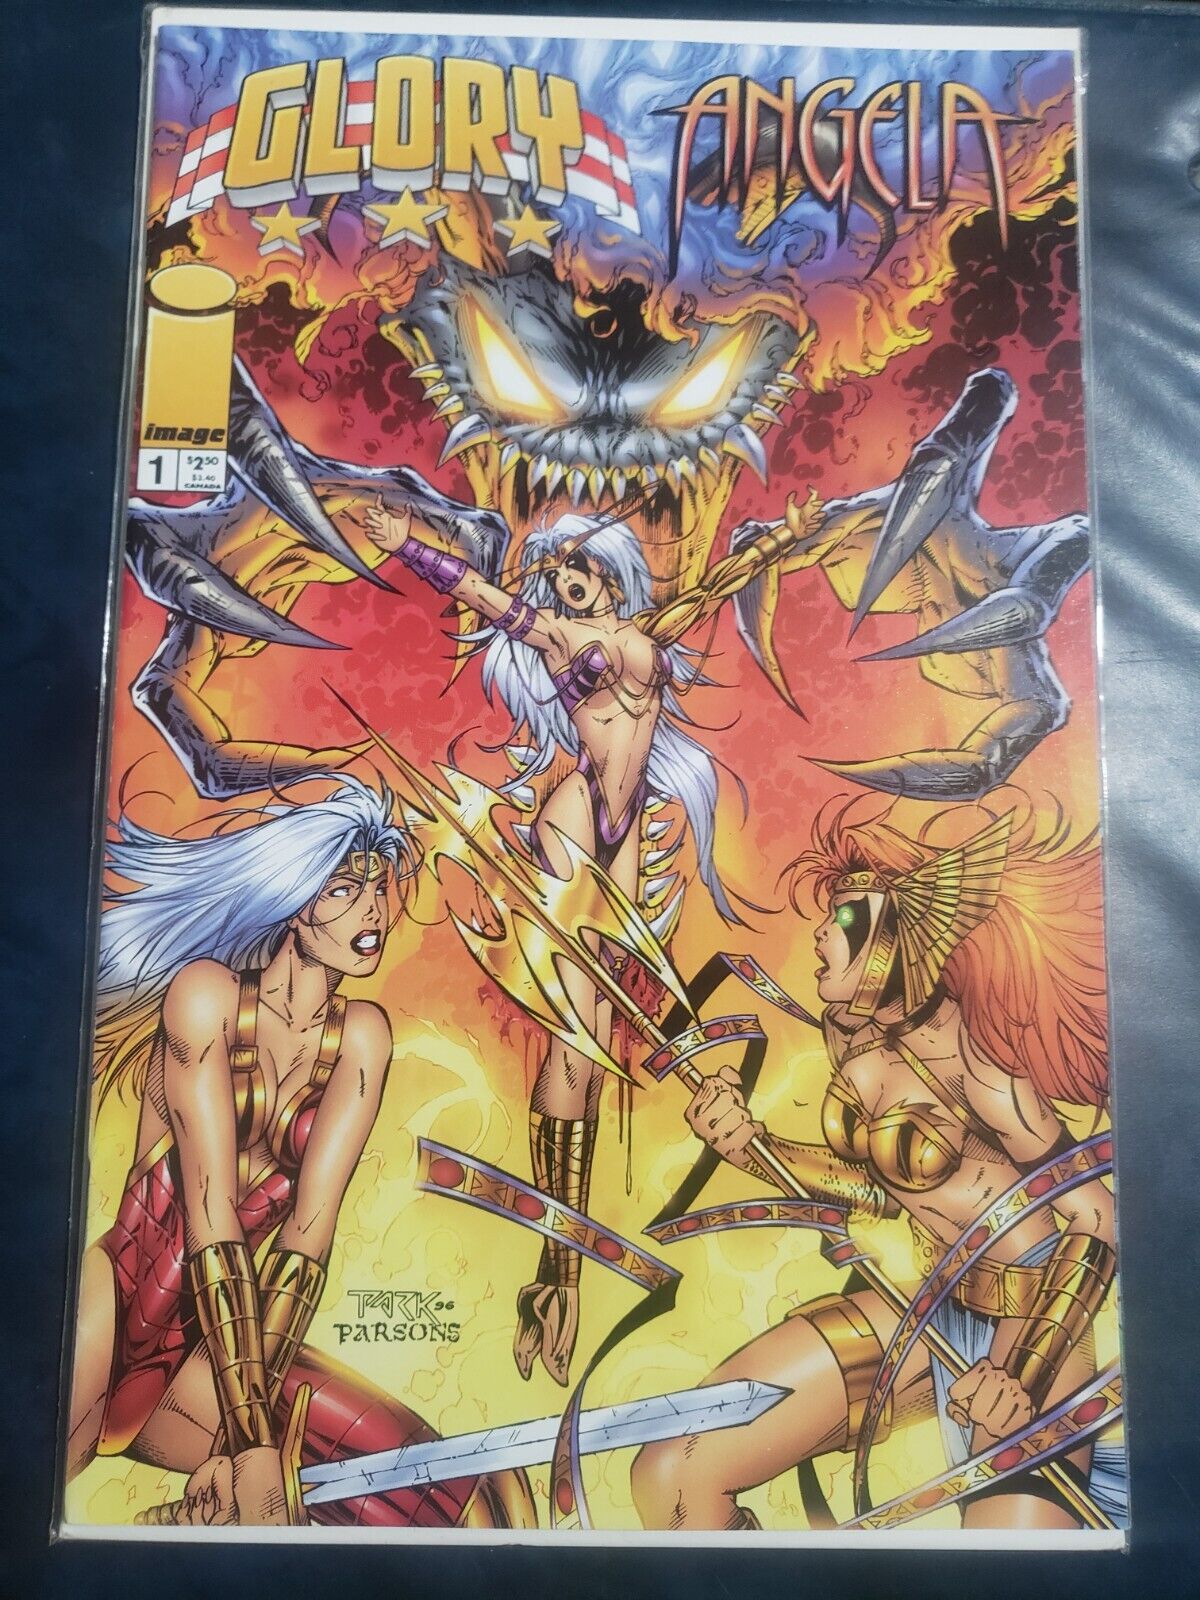 GLORY/ANGELA: ANGELS IN HELL One-shot - Includes 1st App. Darkchylde - NM